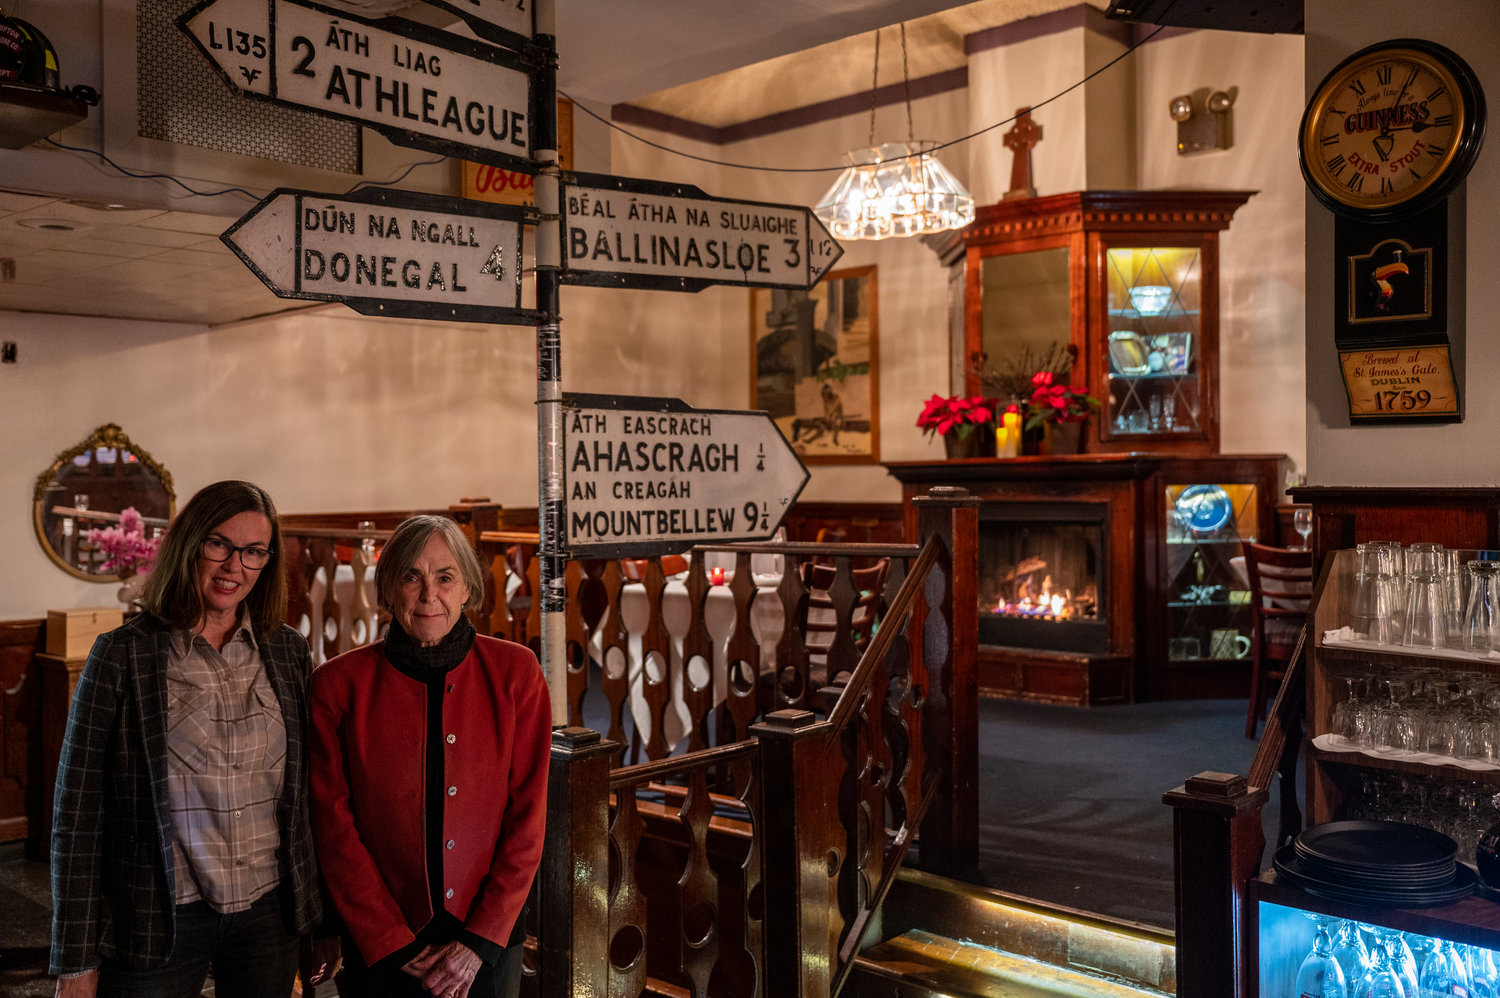 While the food might be heading outside, the work continues inside from those like Eileen Connaughton, left, and Anne Connaughton inside their family's steakhouse.